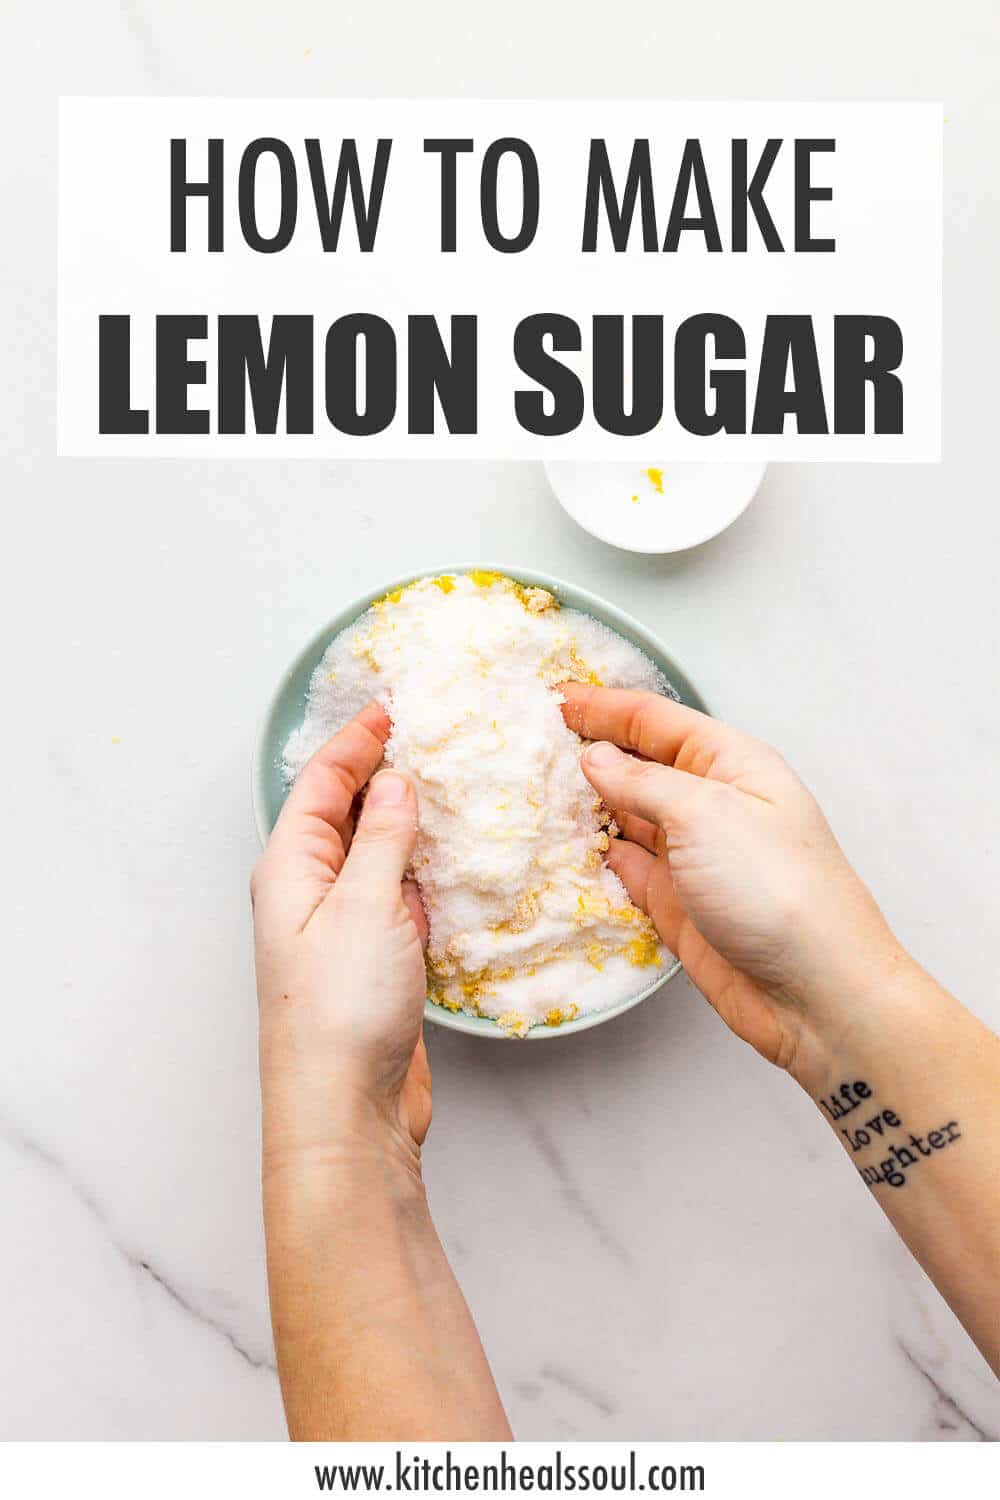 Making lemon sugar in a bowl by rubbing together granulated sugar and lemon zest with fingertips.